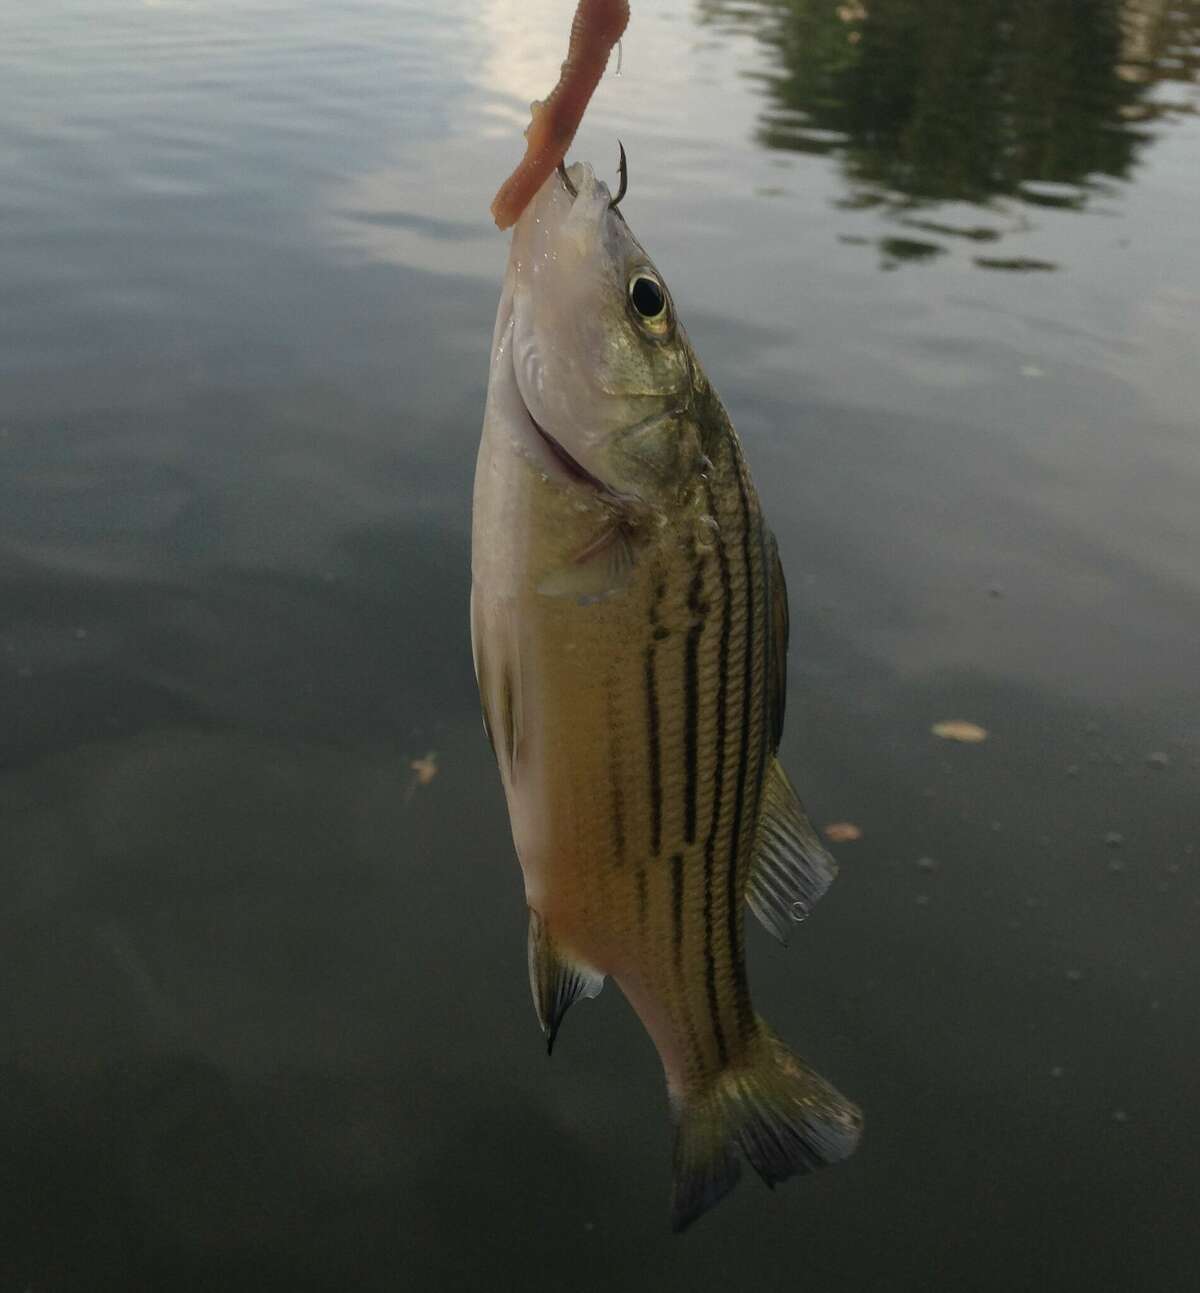 Juvenile hybrids look very similar to white bass, so if you catch any under 18 inches long and are not sure which fish it is put it back in the lake.